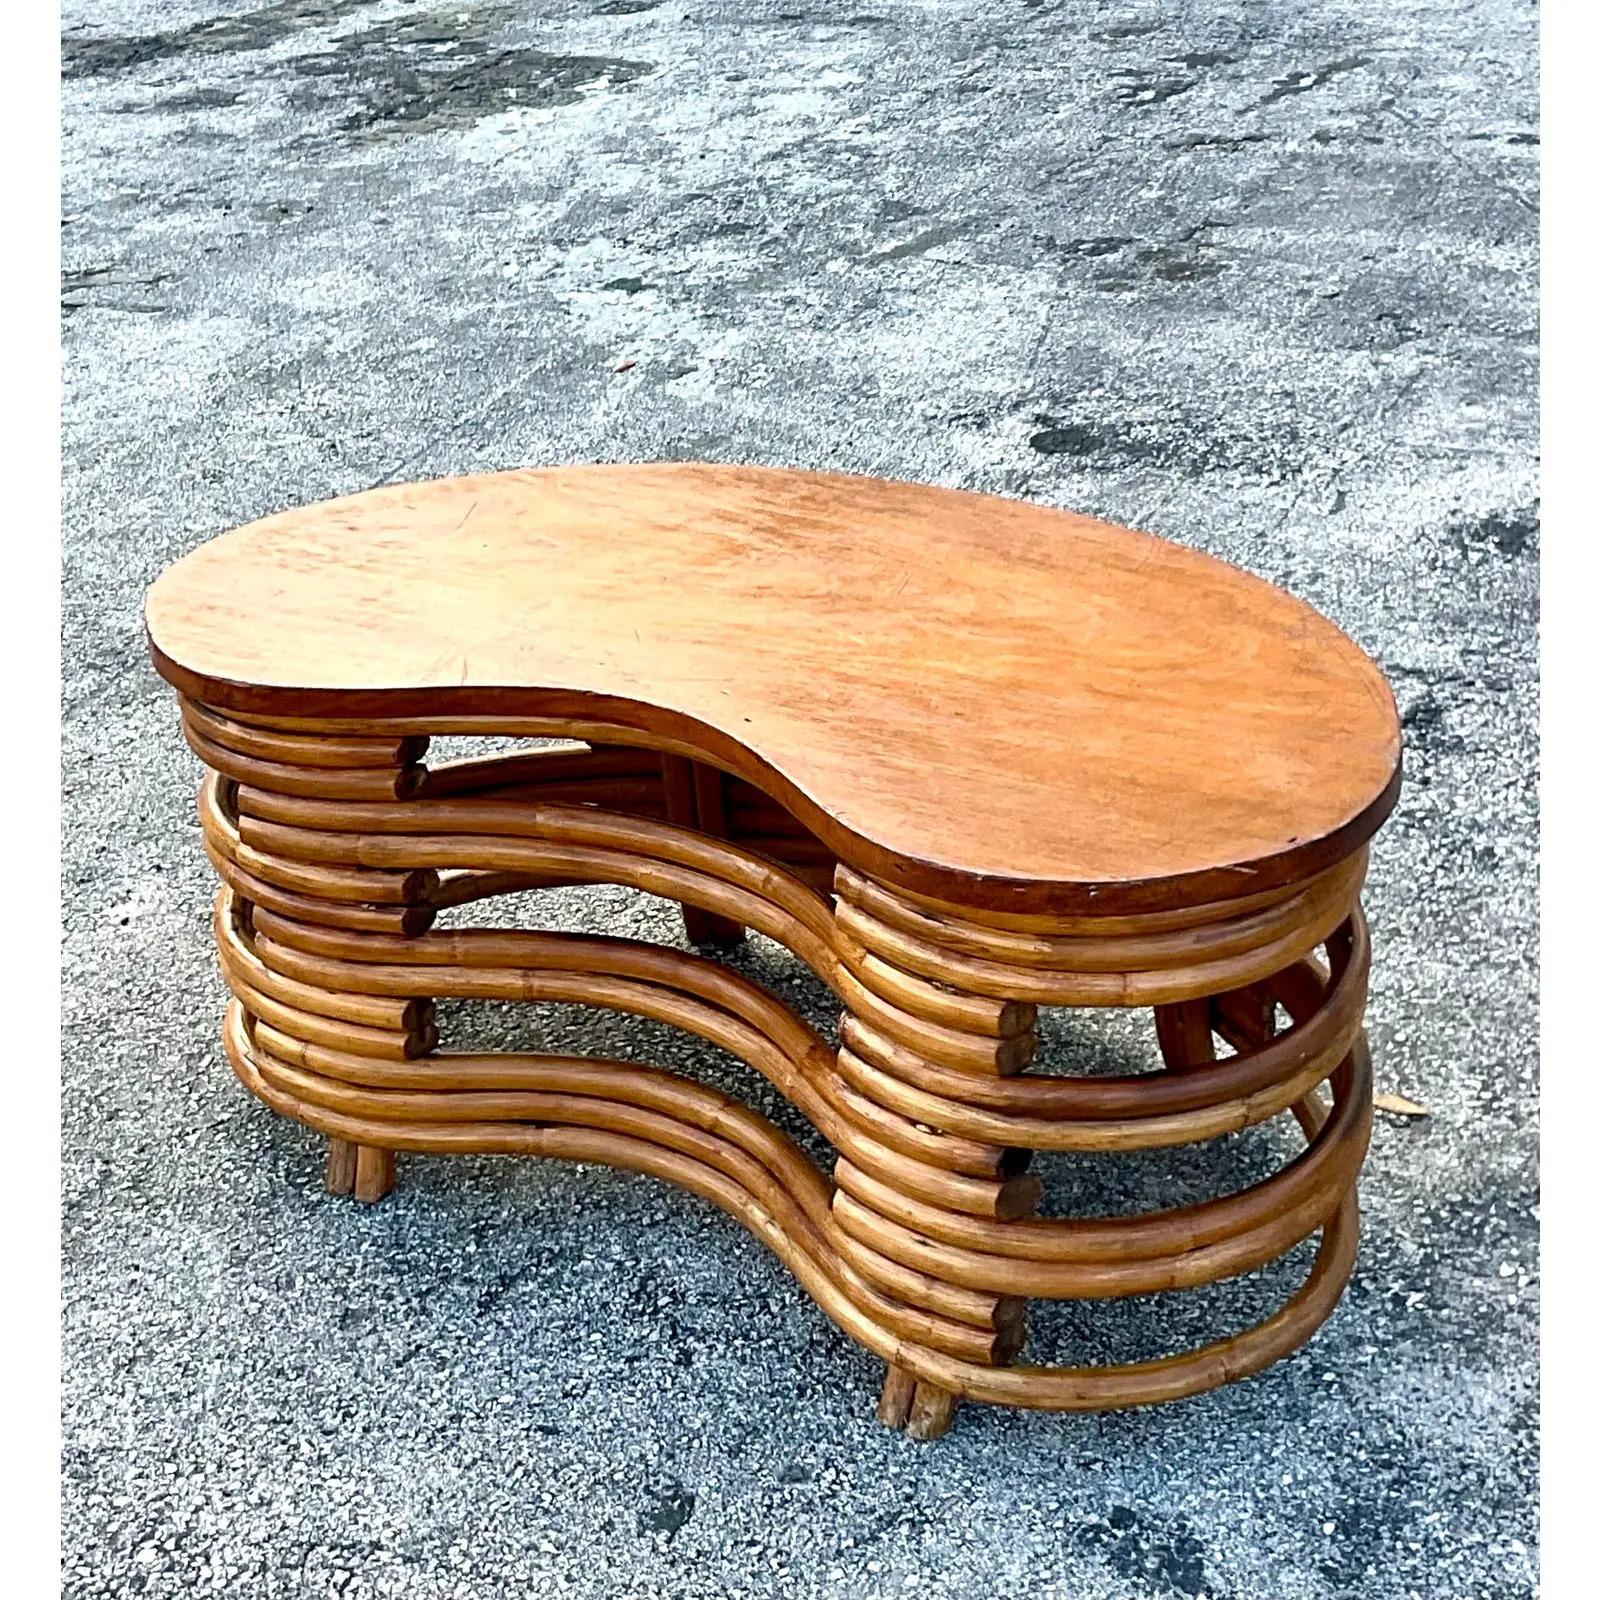 Fantastic vintage MCM Rattan coffee table. Done in the manner of the iconic Paul Frankl. A chic kidney bean shape with a solid wood top. Acquired from a Palm Beach estate.